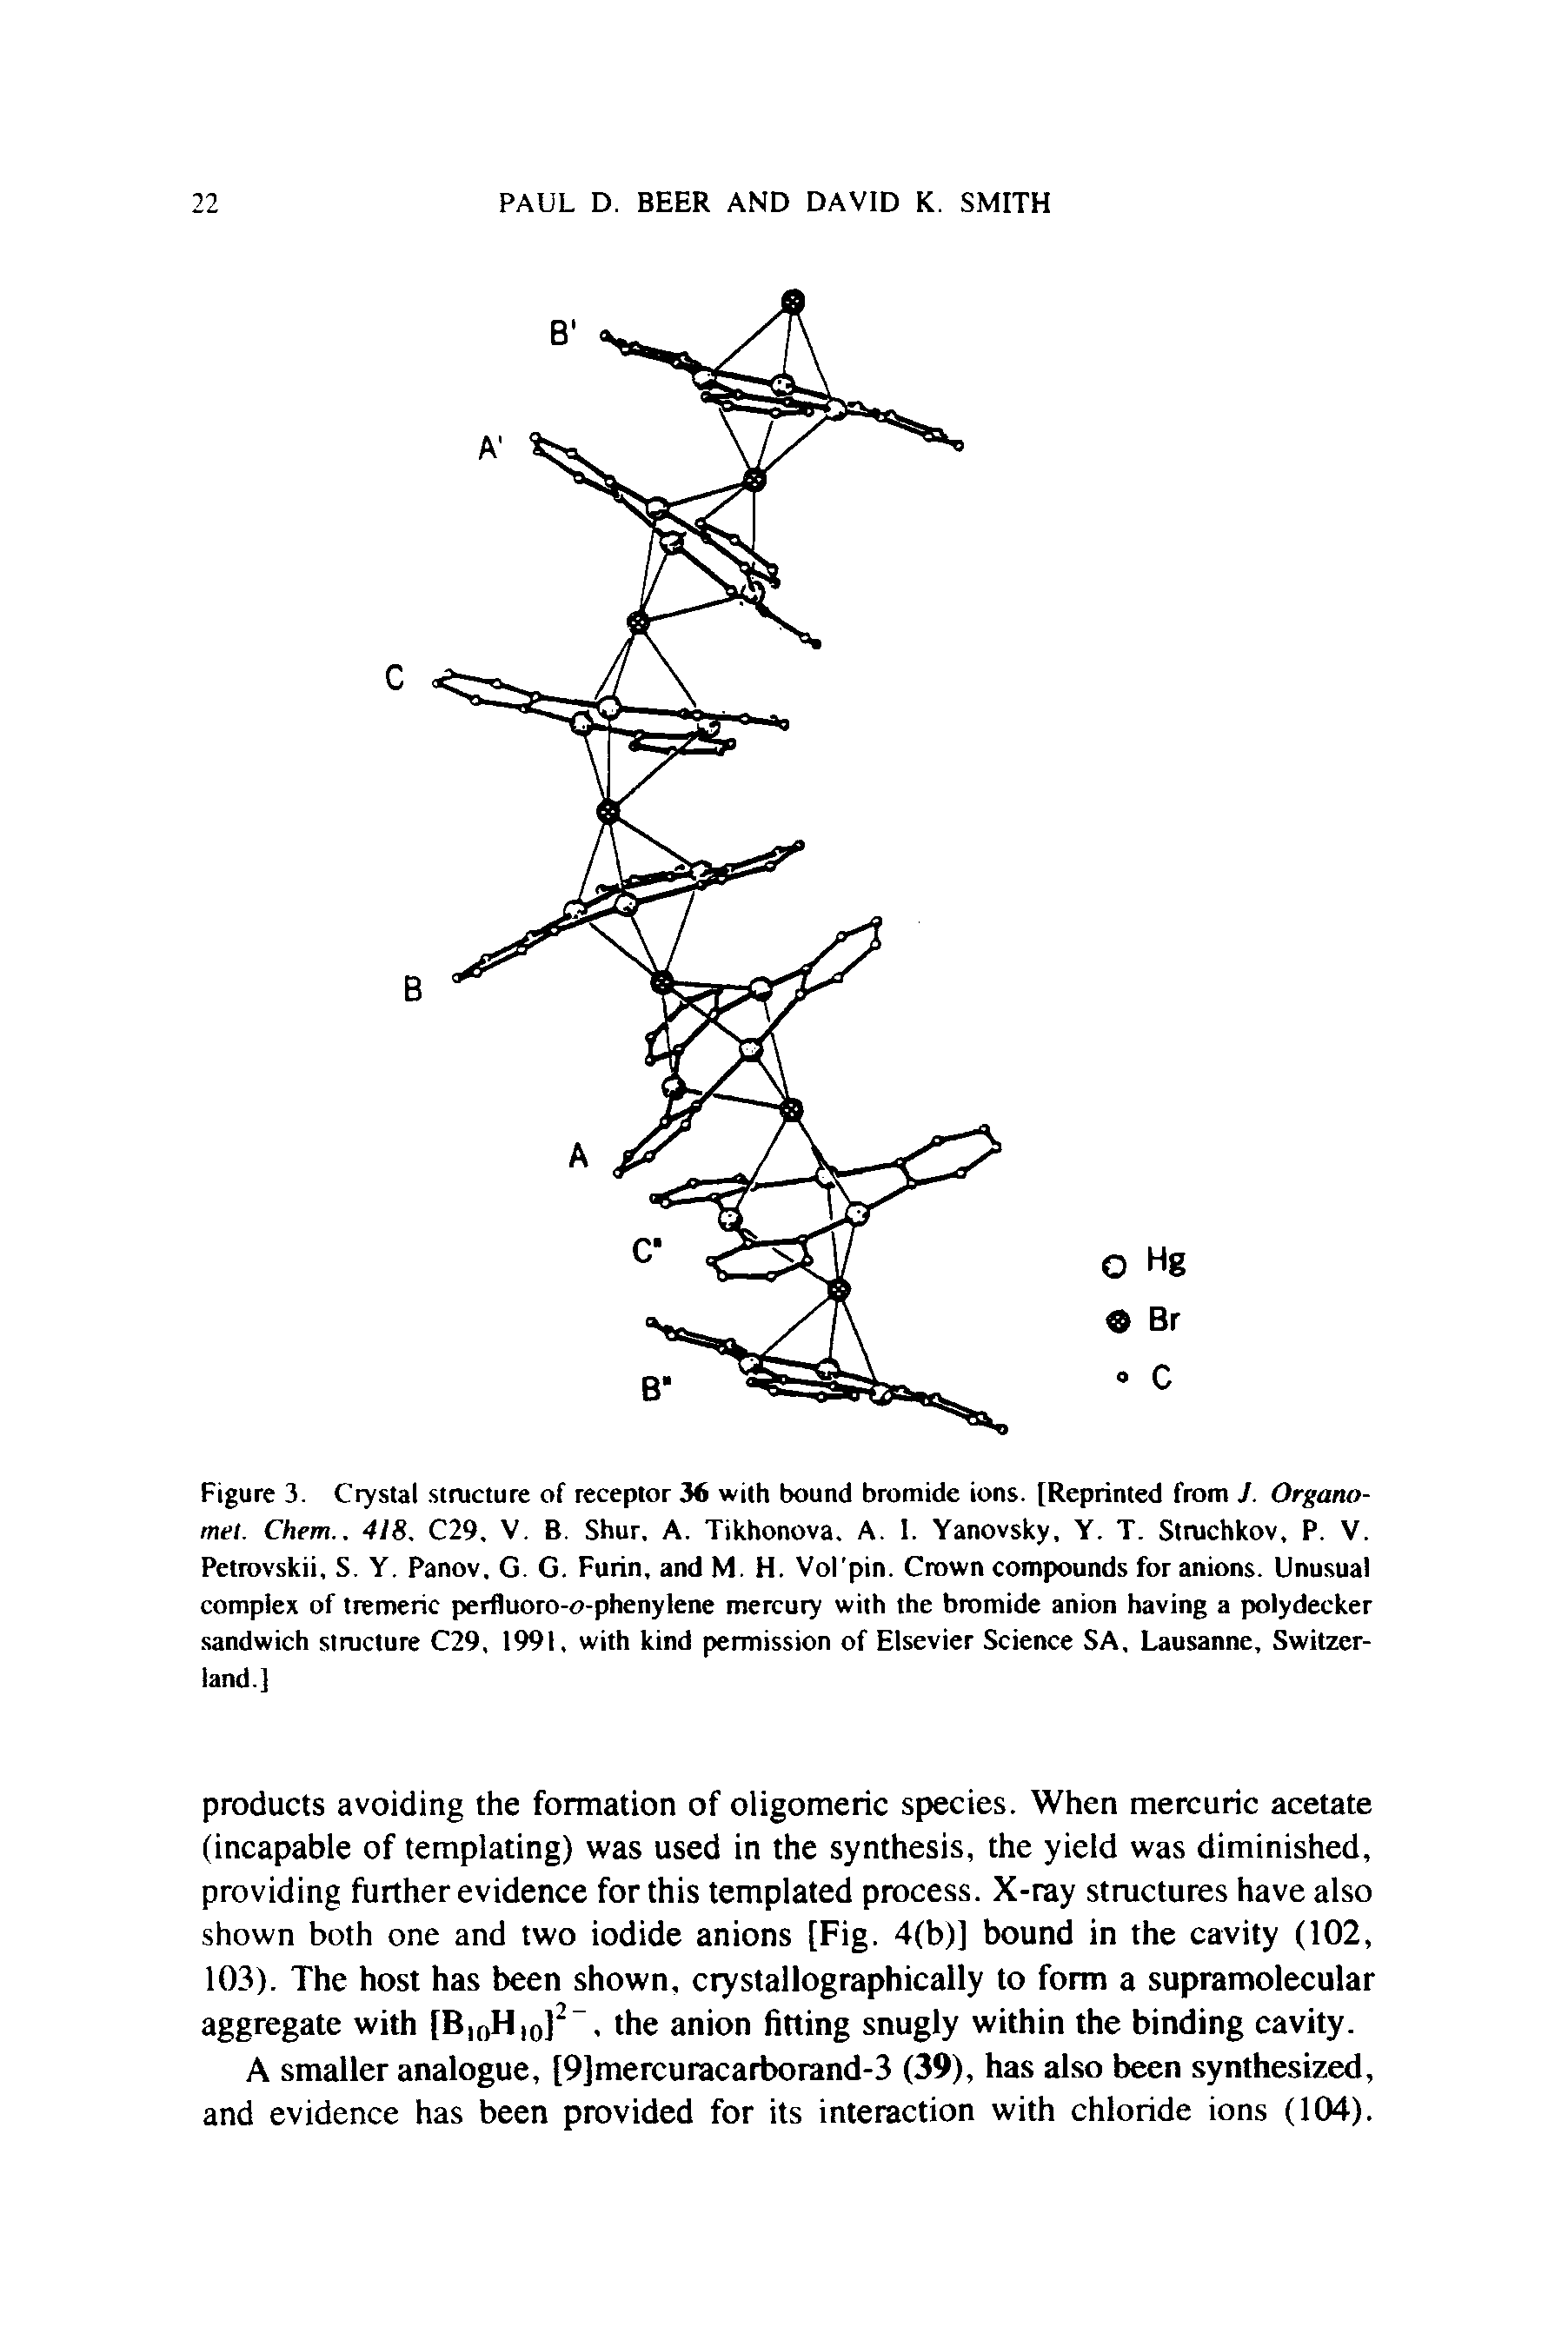 Figure 3. Crystal structure of receptor 36 with bound bromide ions. [Reprinted from J. Organo-mel. Chem.. 418. C29. V. B. Shur, A. Tikhonova. A. I. Yanovsky, Y. T. Struchkov, P. V. Petrovskii, S. Y. Panov. G. G. Furin, and M. H. Vol pin. Crown compounds for anions. Unusual complex of tremeric perfluoro-o-phenylene mercury with the bromide anion having a polydecker sandwich structure C29, 1991, with kind permission of Elsevier Science SA, Lausanne, Switzerland.]...